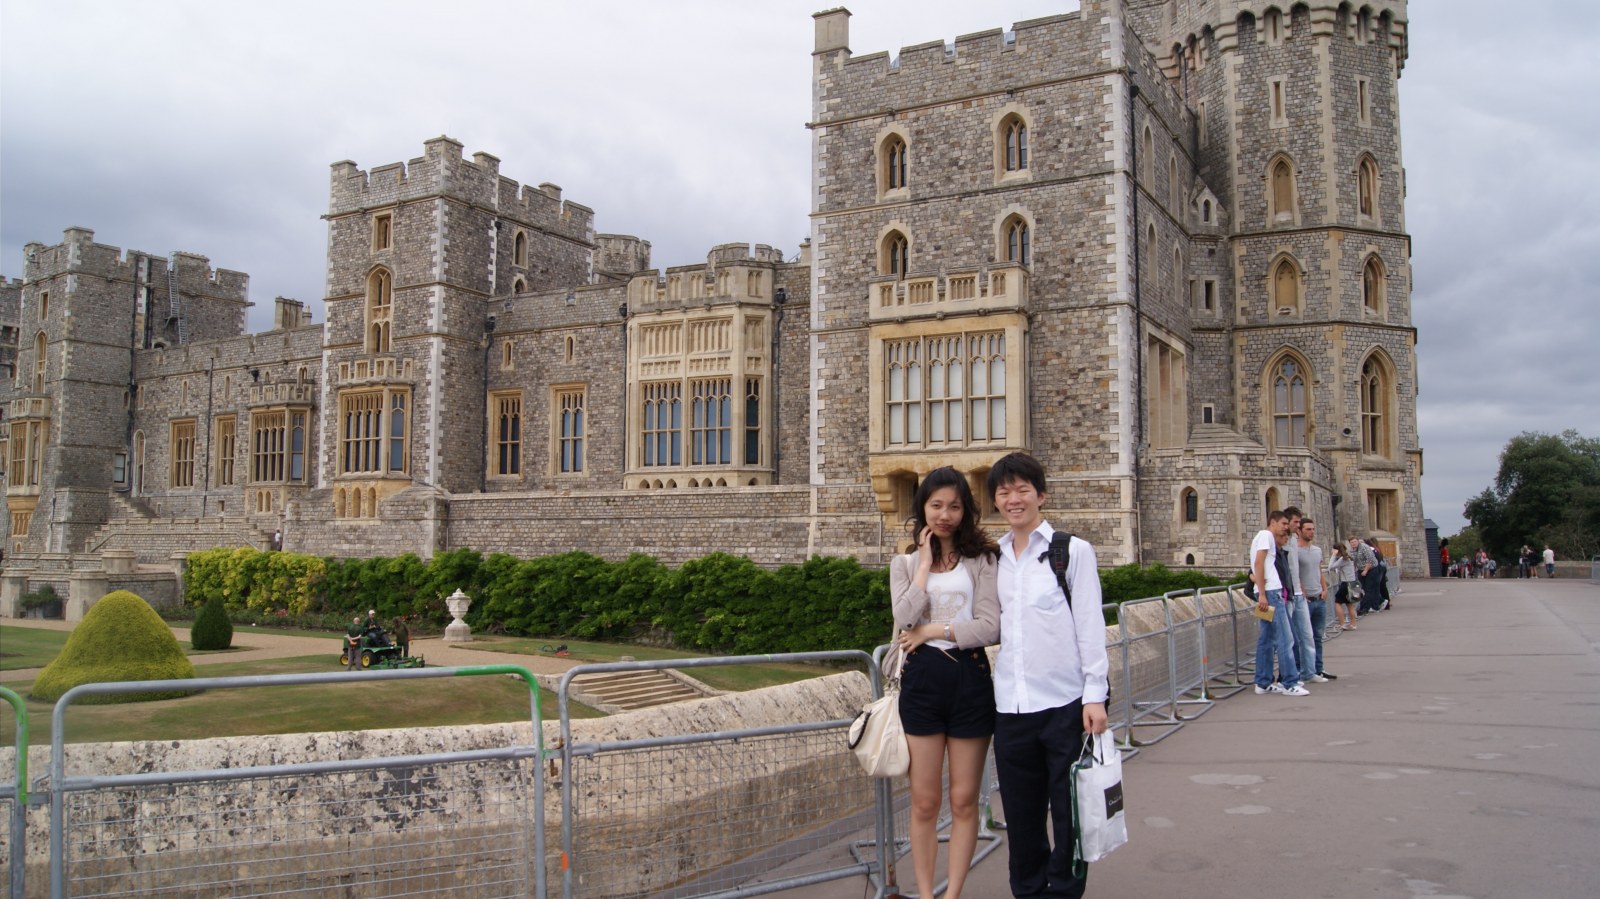 #Travel with me - Windsor Castle (Photography)  再访温莎城堡